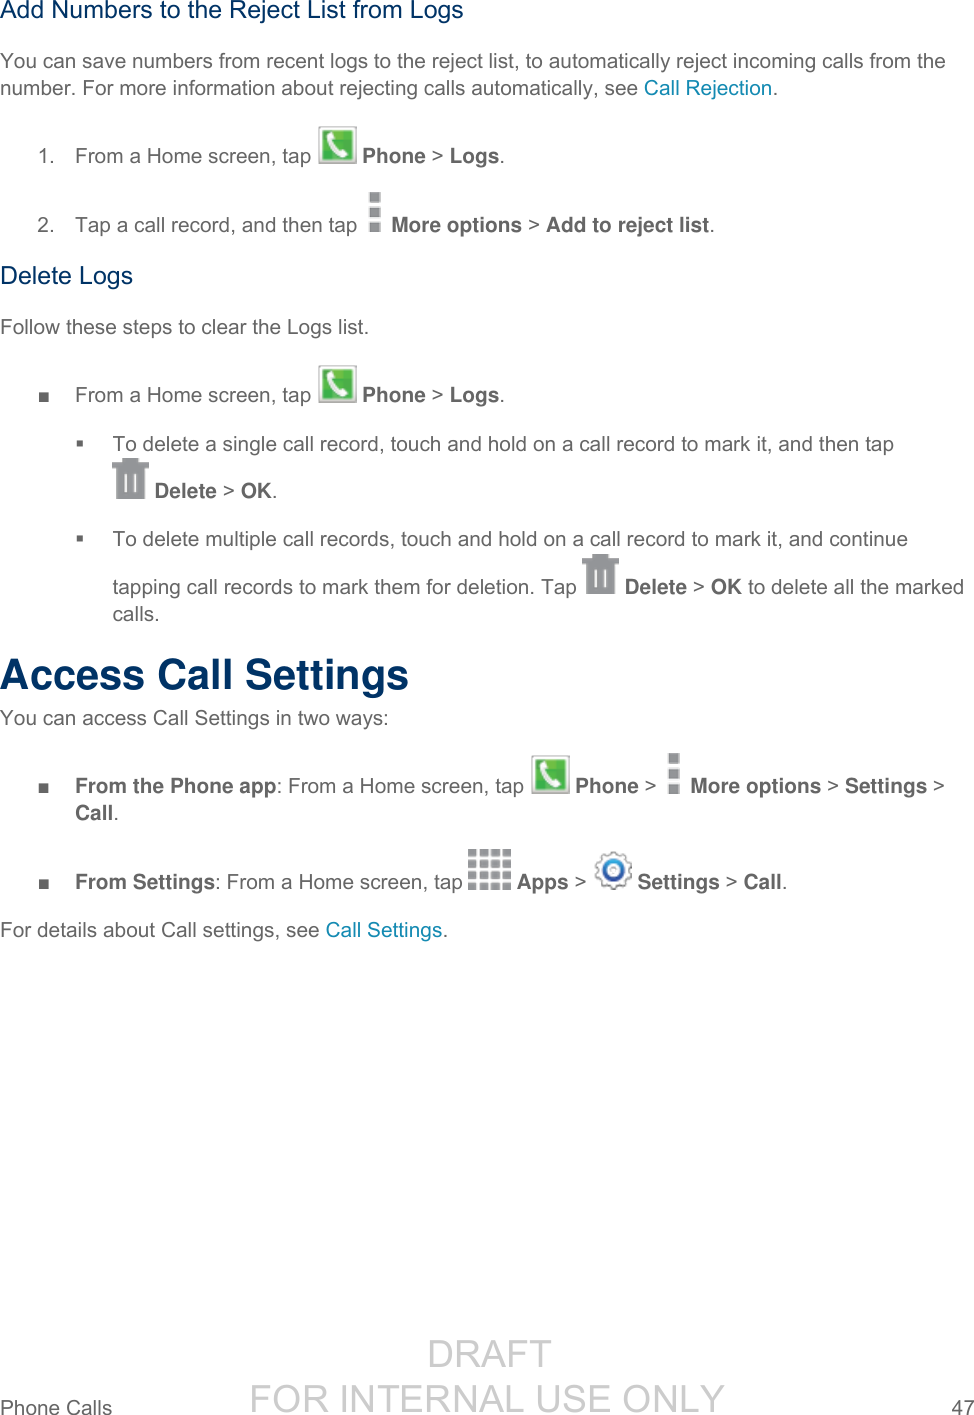                  DRAFT FOR INTERNAL USE ONLY Phone Calls  47   Add Numbers to the Reject List from Logs You can save numbers from recent logs to the reject list, to automatically reject incoming calls from the number. For more information about rejecting calls automatically, see Call Rejection. 1.  From a Home screen, tap   Phone &gt; Logs. 2.  Tap a call record, and then tap   More options &gt; Add to reject list. Delete Logs Follow these steps to clear the Logs list. ■  From a Home screen, tap   Phone &gt; Logs.   To delete a single call record, touch and hold on a call record to mark it, and then tap   Delete &gt; OK.    To delete multiple call records, touch and hold on a call record to mark it, and continue tapping call records to mark them for deletion. Tap   Delete &gt; OK to delete all the marked calls. Access Call Settings You can access Call Settings in two ways: ■ From the Phone app: From a Home screen, tap   Phone &gt;   More options &gt; Settings &gt; Call. ■ From Settings: From a Home screen, tap   Apps &gt;   Settings &gt; Call. For details about Call settings, see Call Settings.     